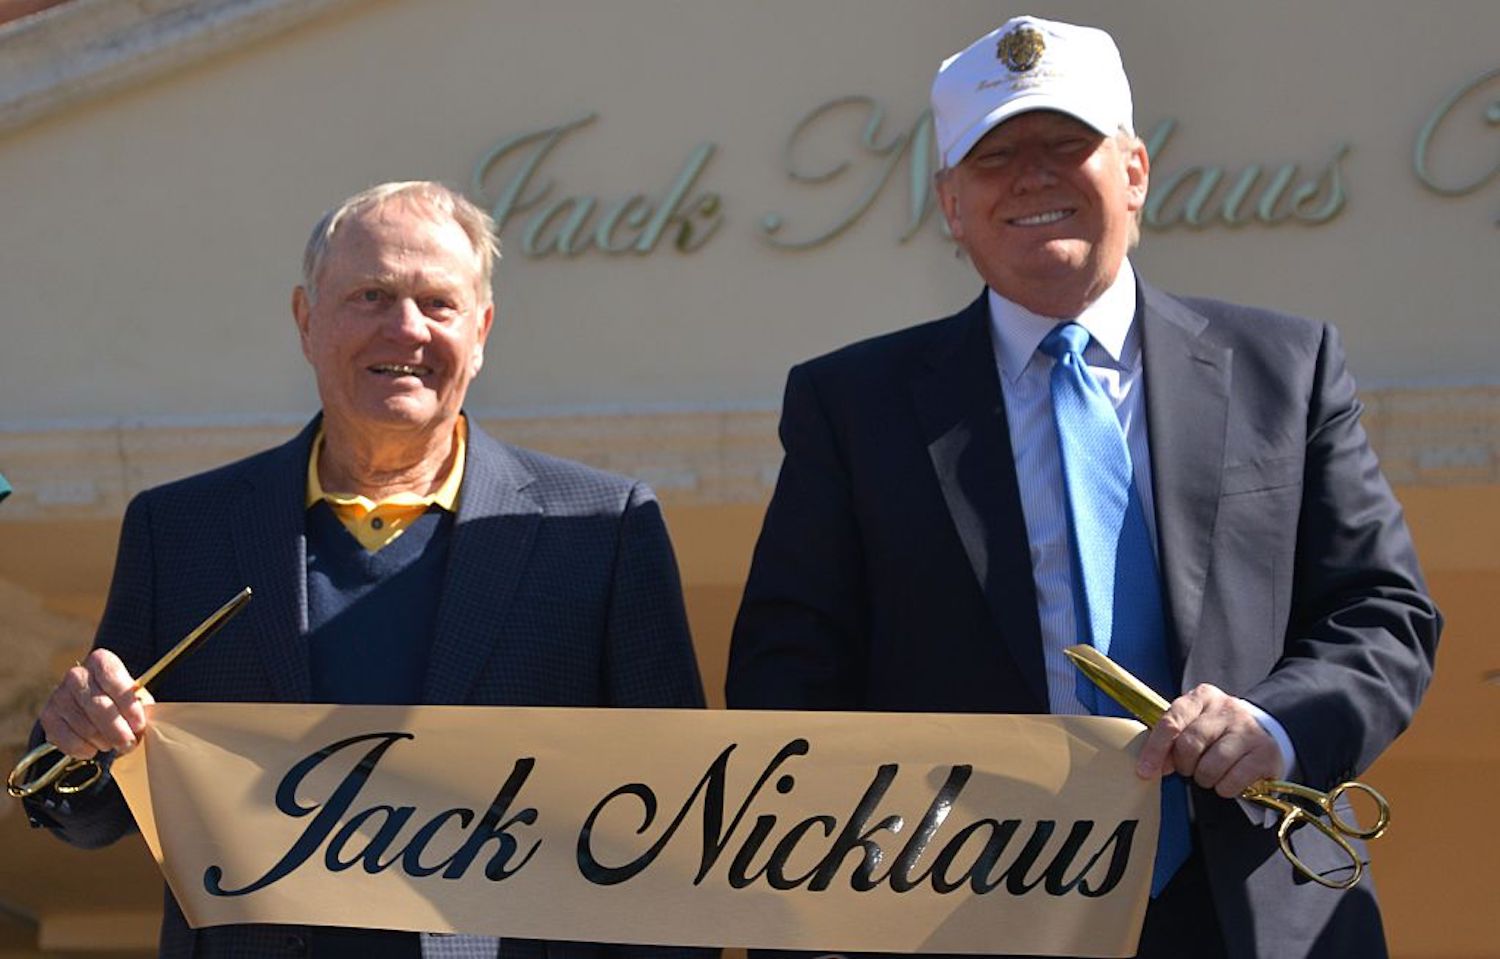 Hall of Famer Jack Nicklaus publicly endorsed Donald Trump on Wednesday, which spurred backlash from celebrities and sports figures alike.